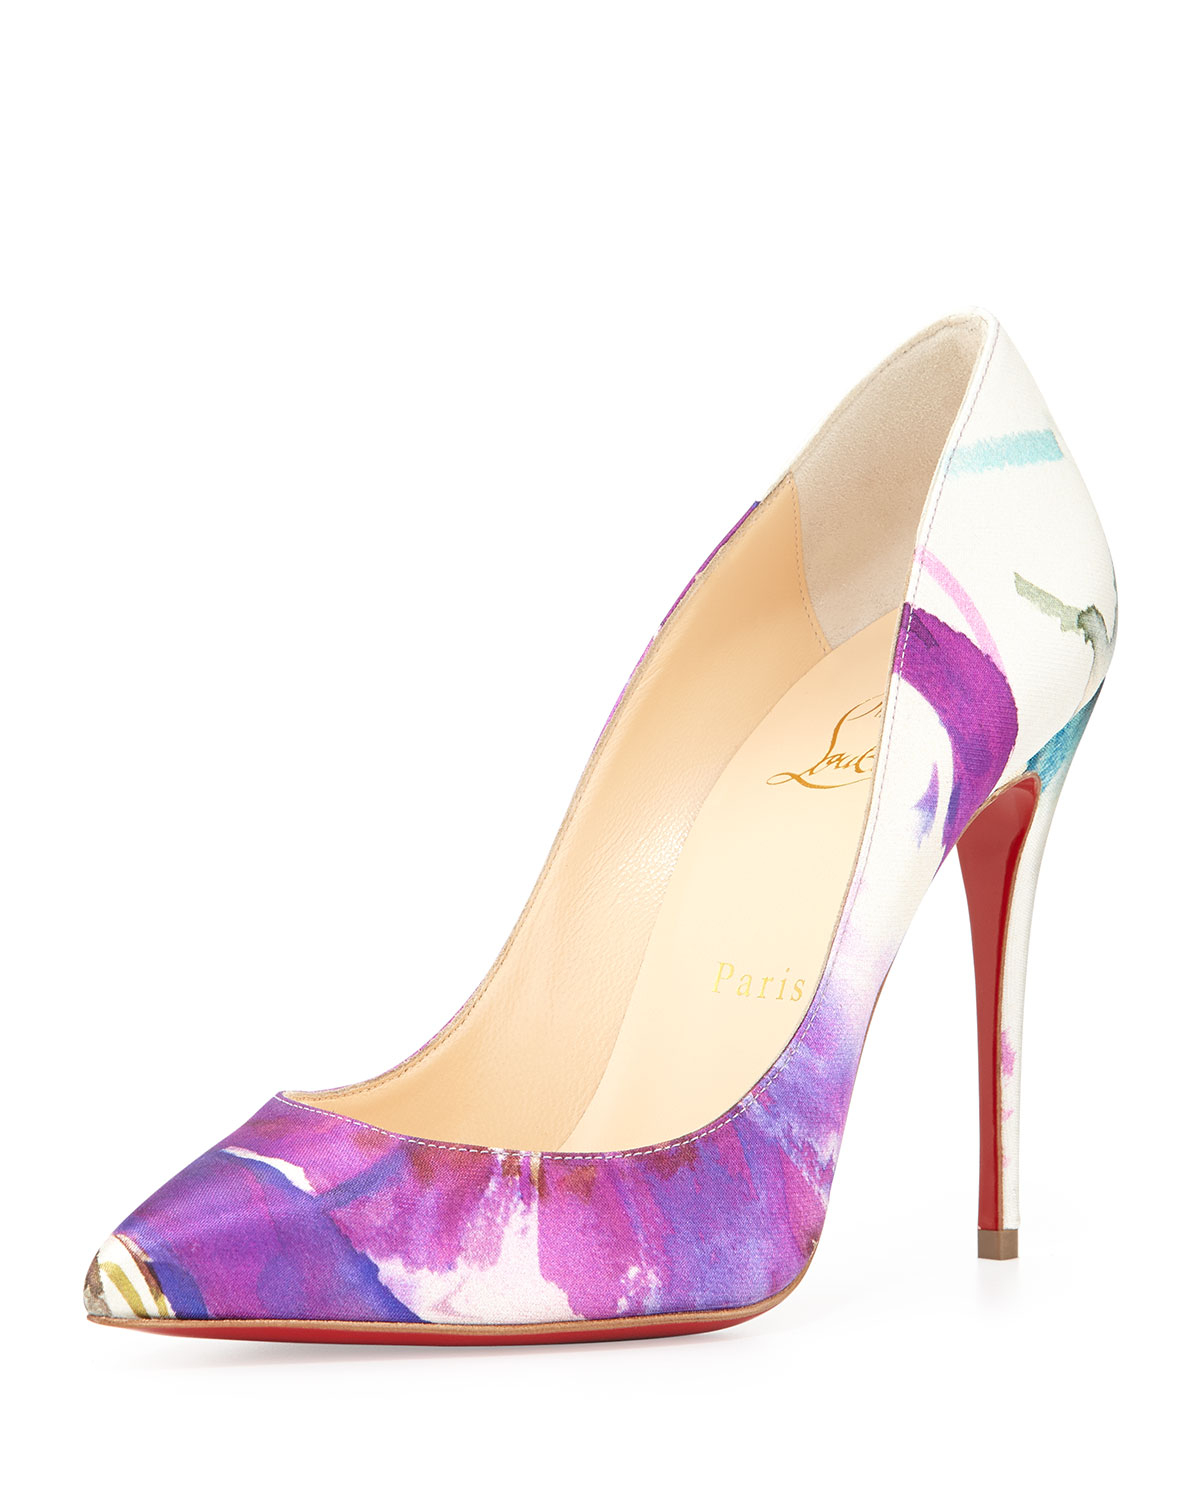 Lyst - Christian Louboutin Pigalle Follies Satin Red Sole Pump in Blue